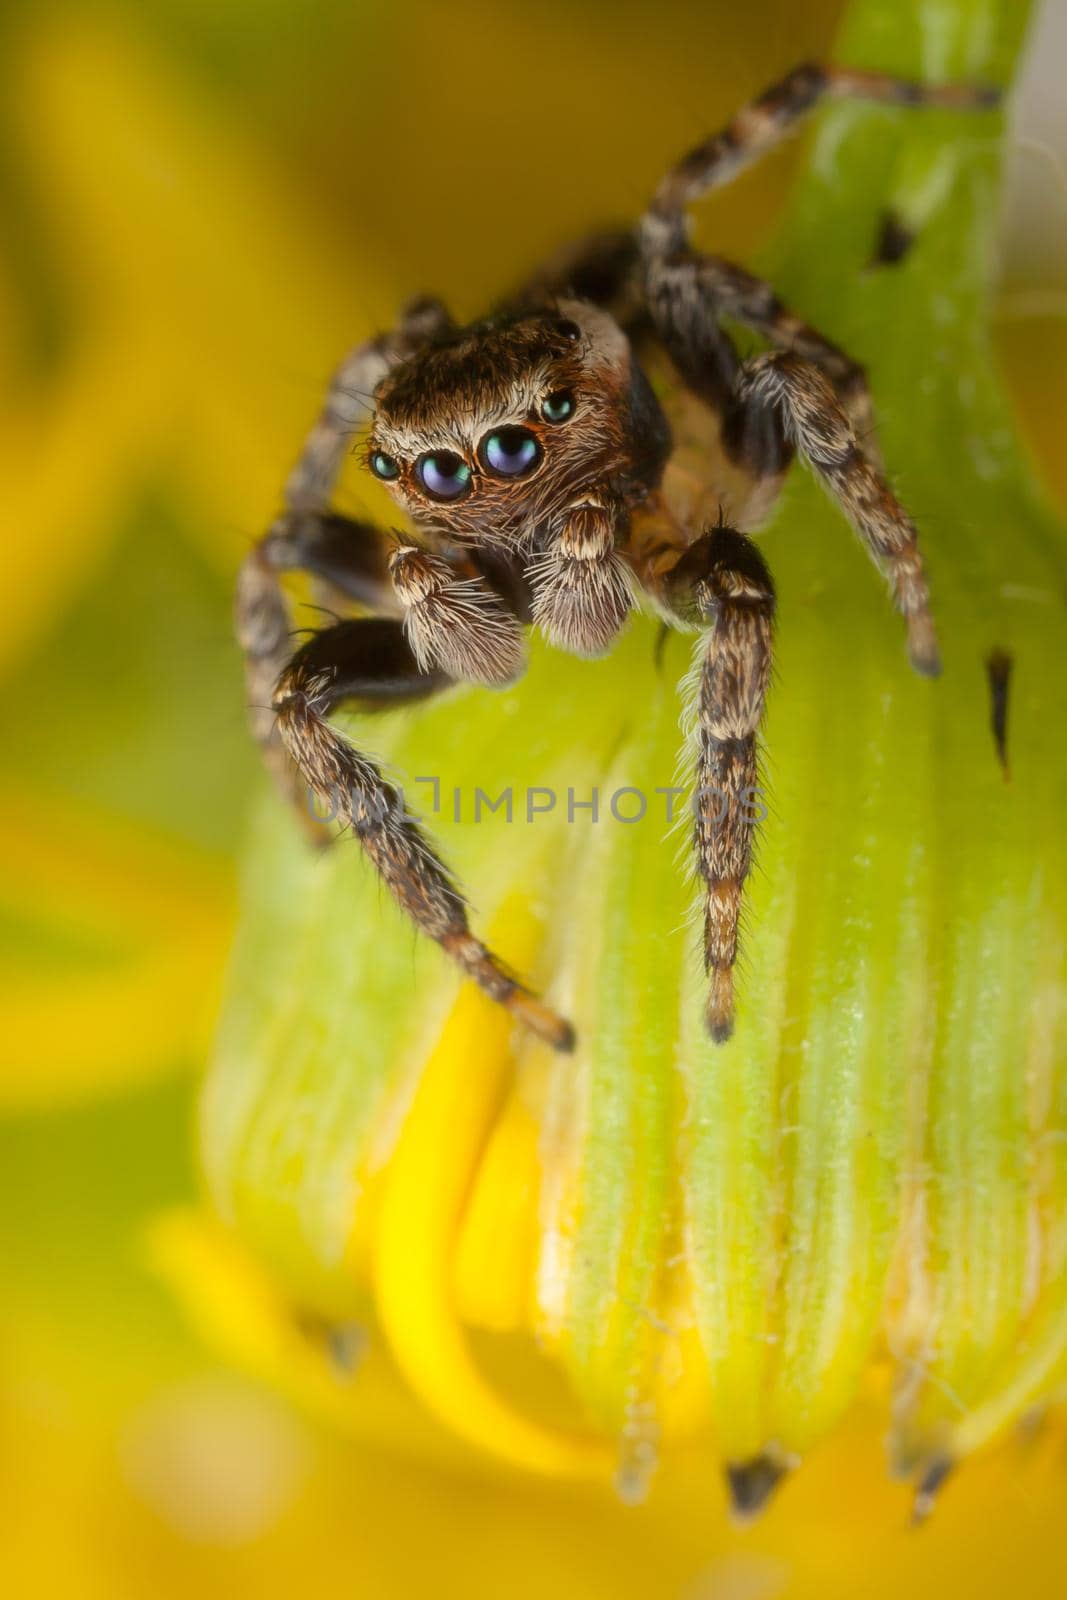 Jumping spider on the yellow bud ready to jump